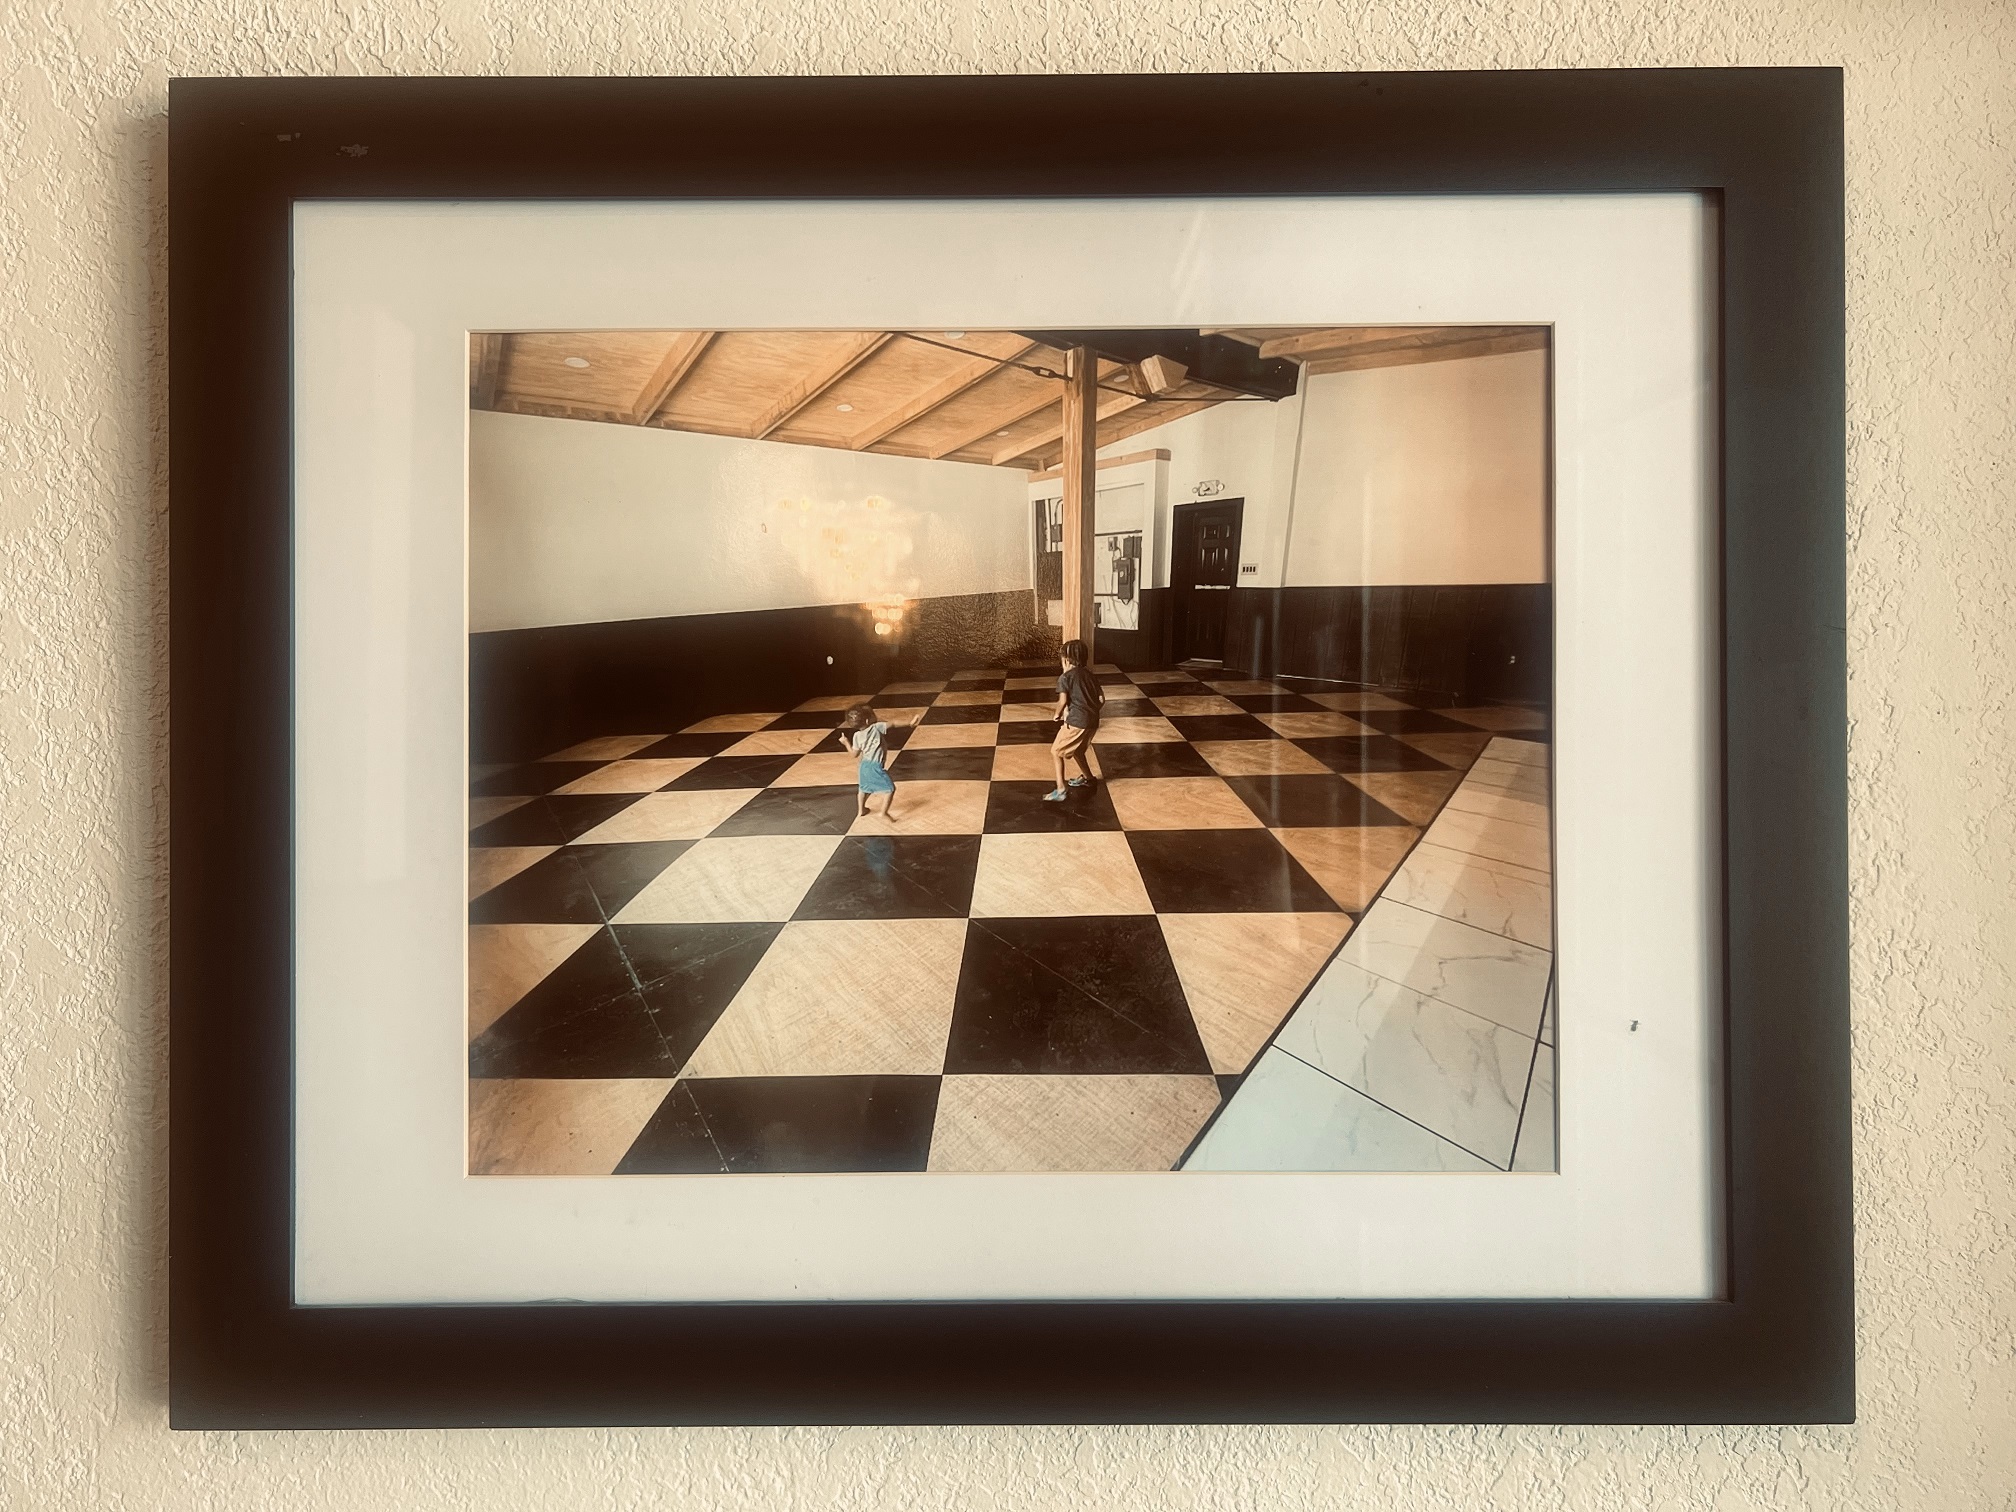 Framed photograph of two children playing on a black and white diamond pattern floor.